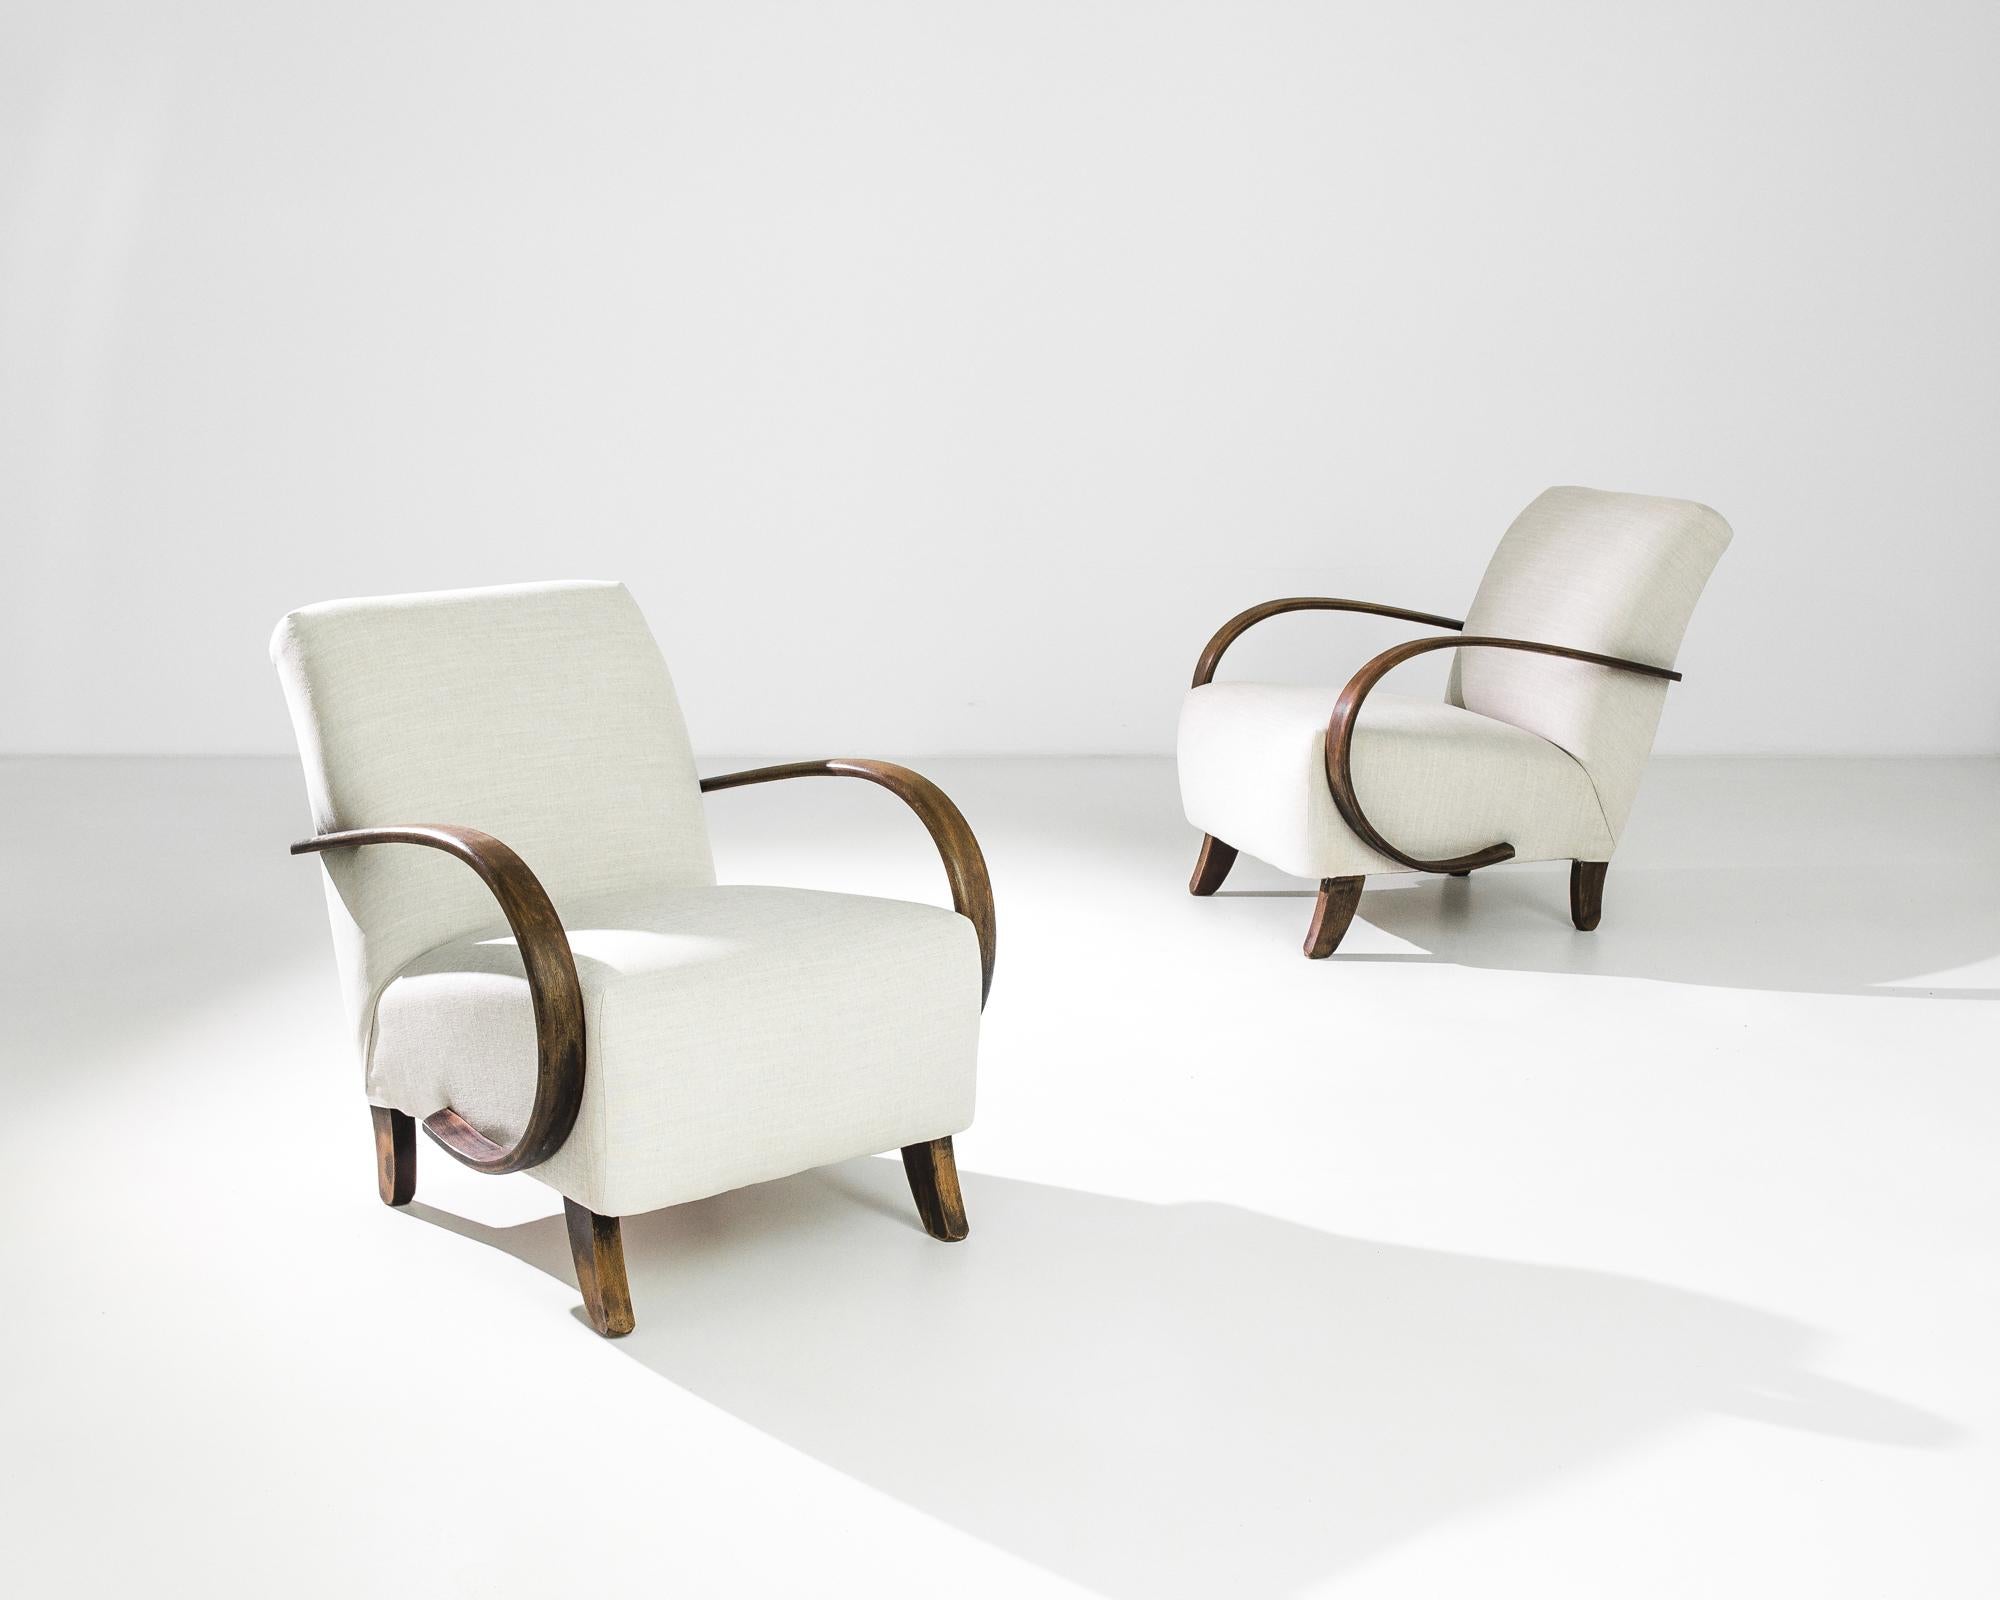 A pair of armchairs by Czech furniture designer J. Halabala. Made in the 1930s, the eye-catching silhouette and comfortable design has an enduring appeal. Influenced by Modern and Art Deco design, a deep upholstered seat upon curved wooden feet is